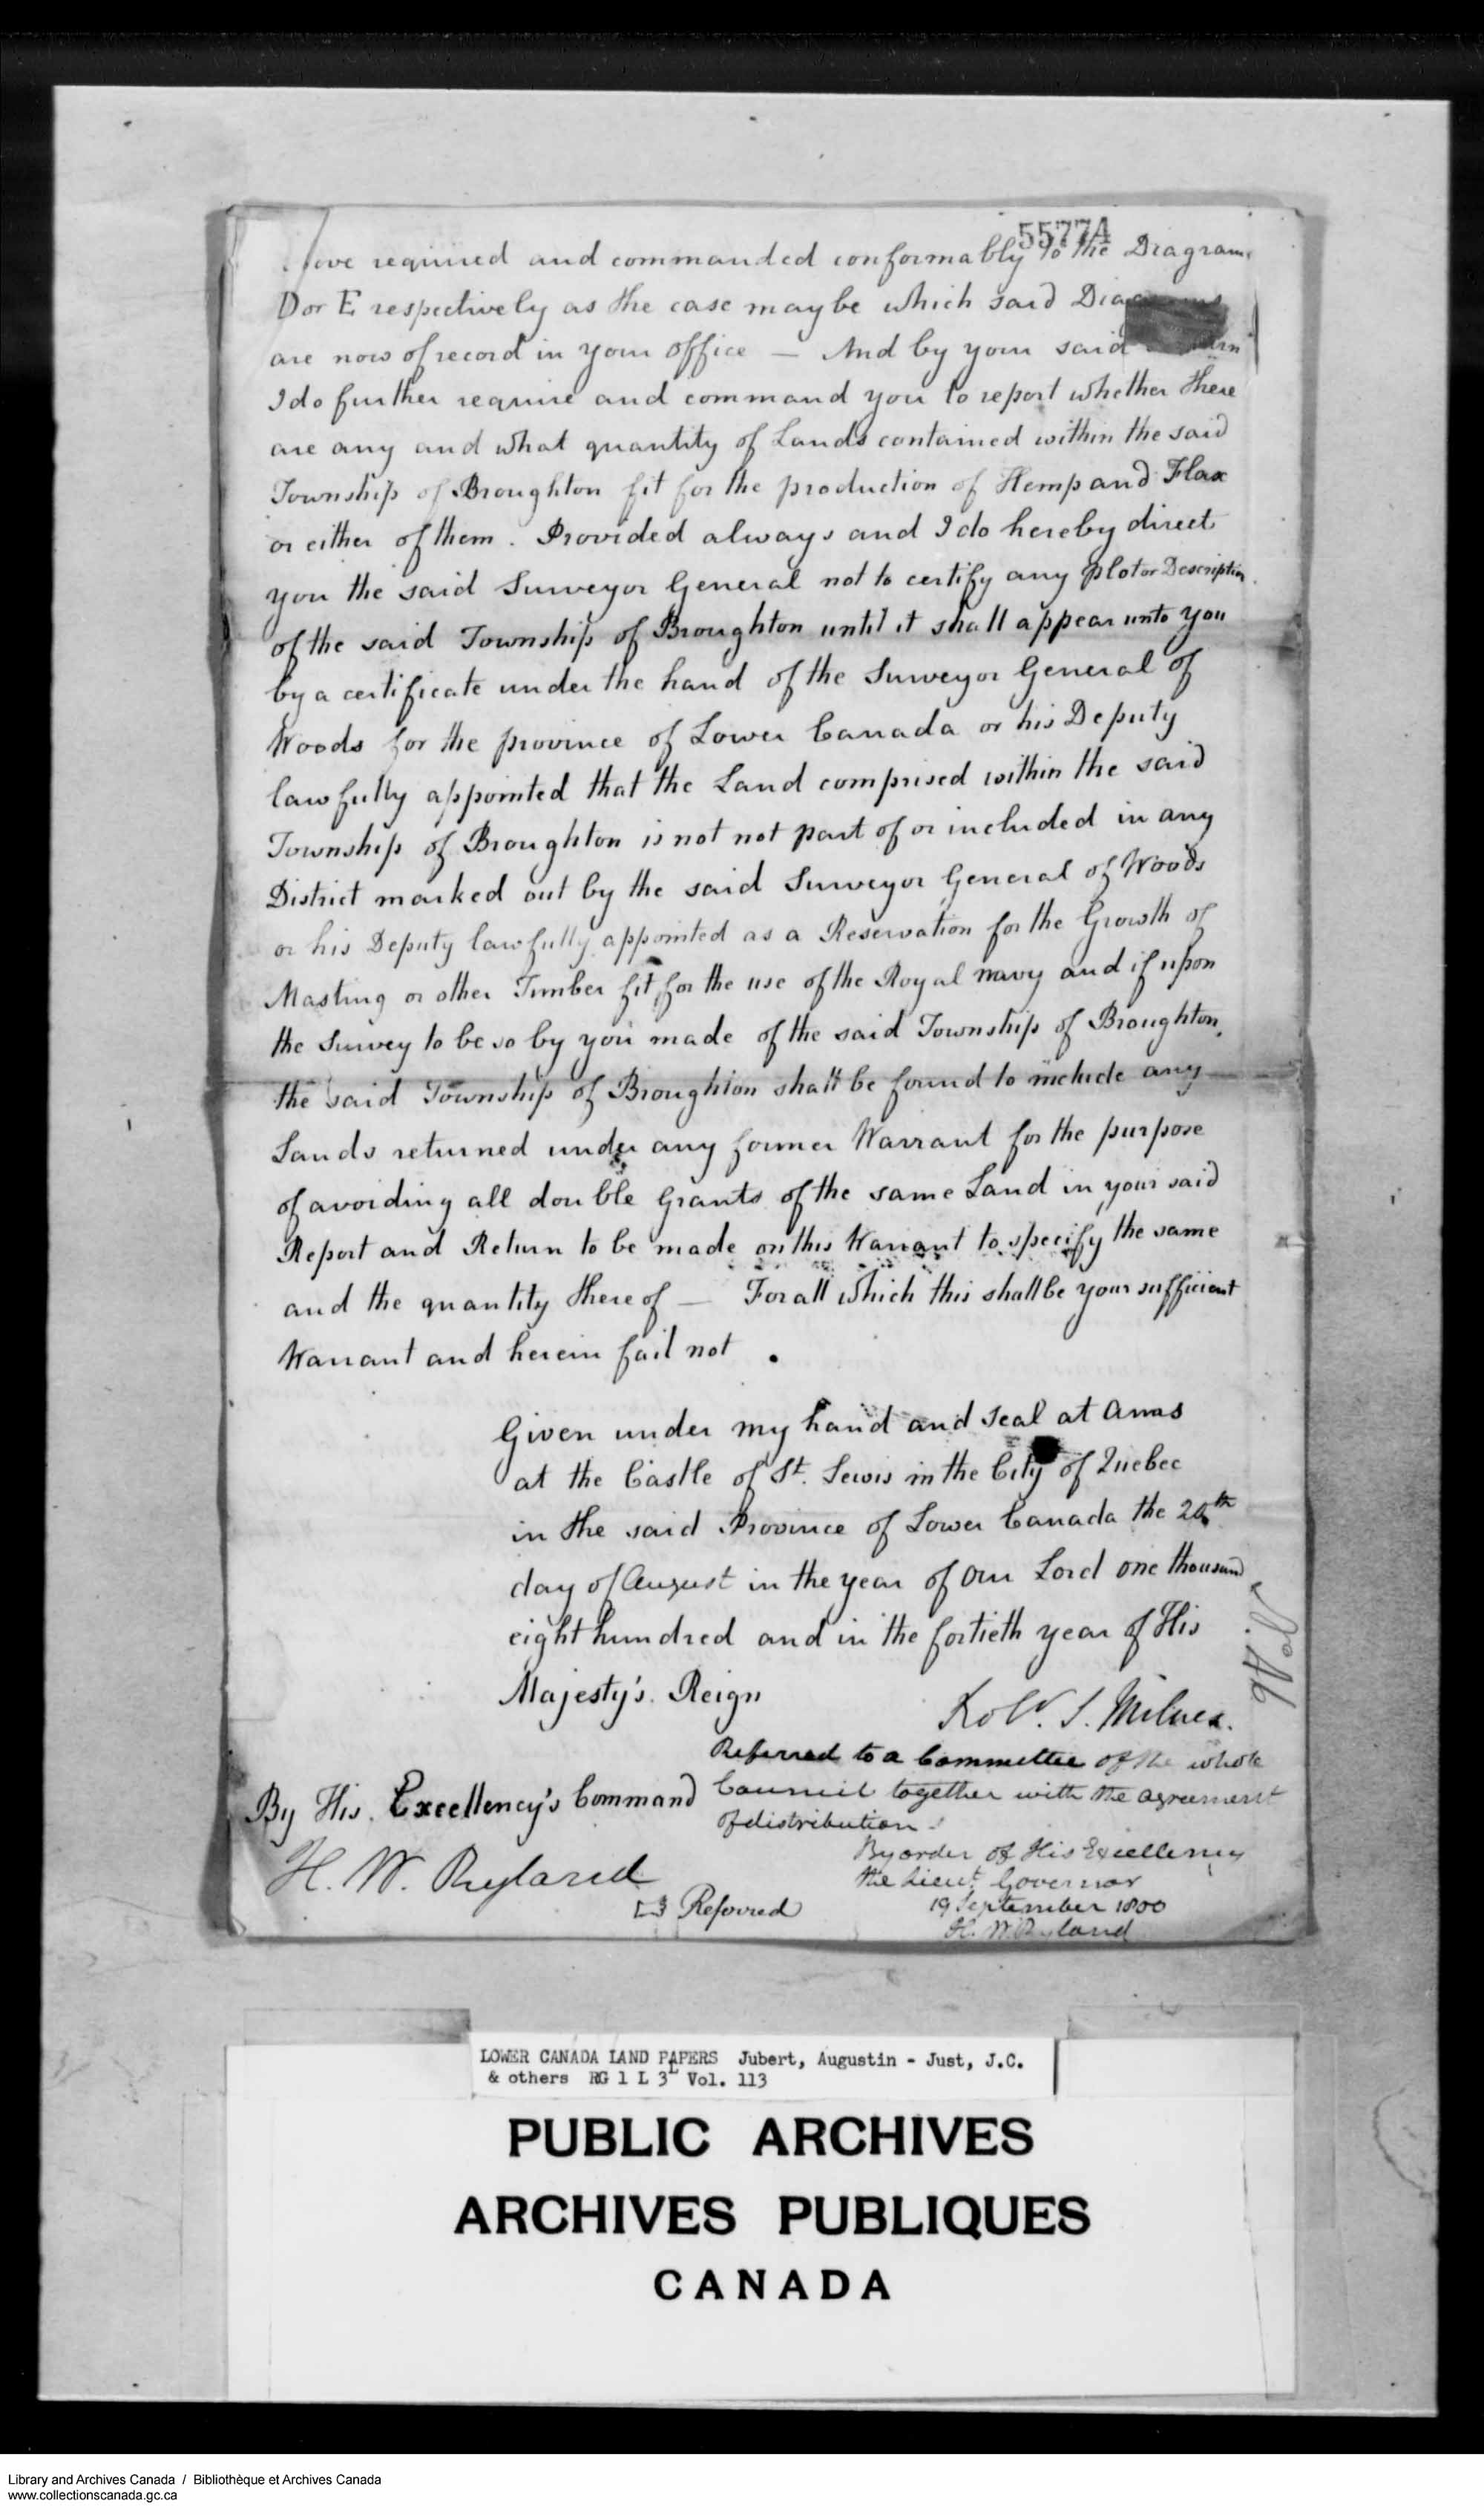 Digitized page of  for Image No.: e008700262